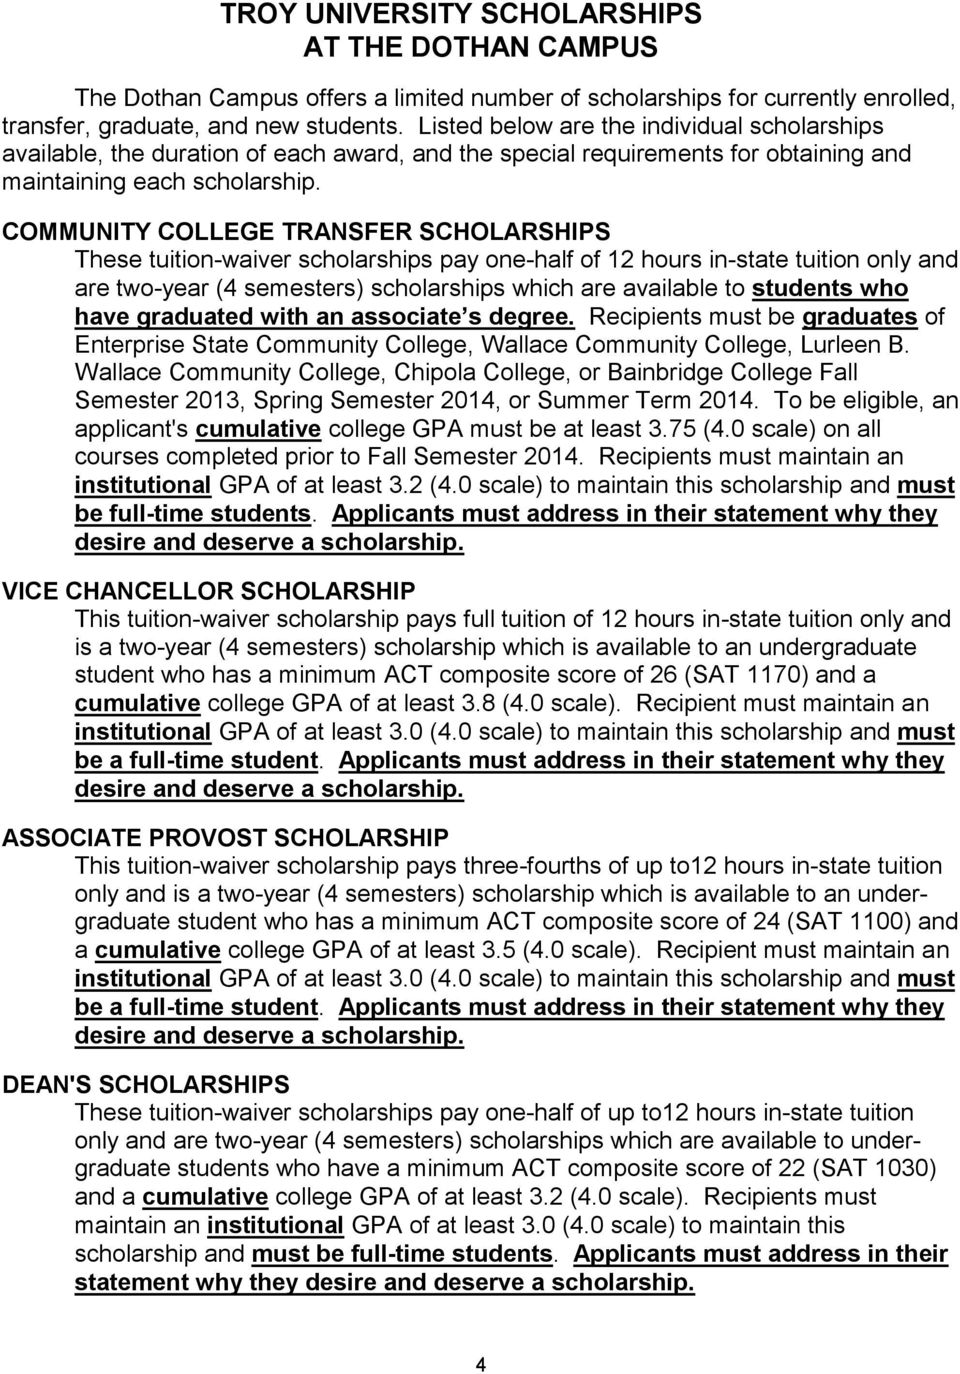 COMMUNITY COLLEGE TRANSFER SCHOLARSHIPS These tuition-waiver scholarships pay one-half of 12 hours in-state tuition only and are two-year (4 semesters) scholarships which are available to students